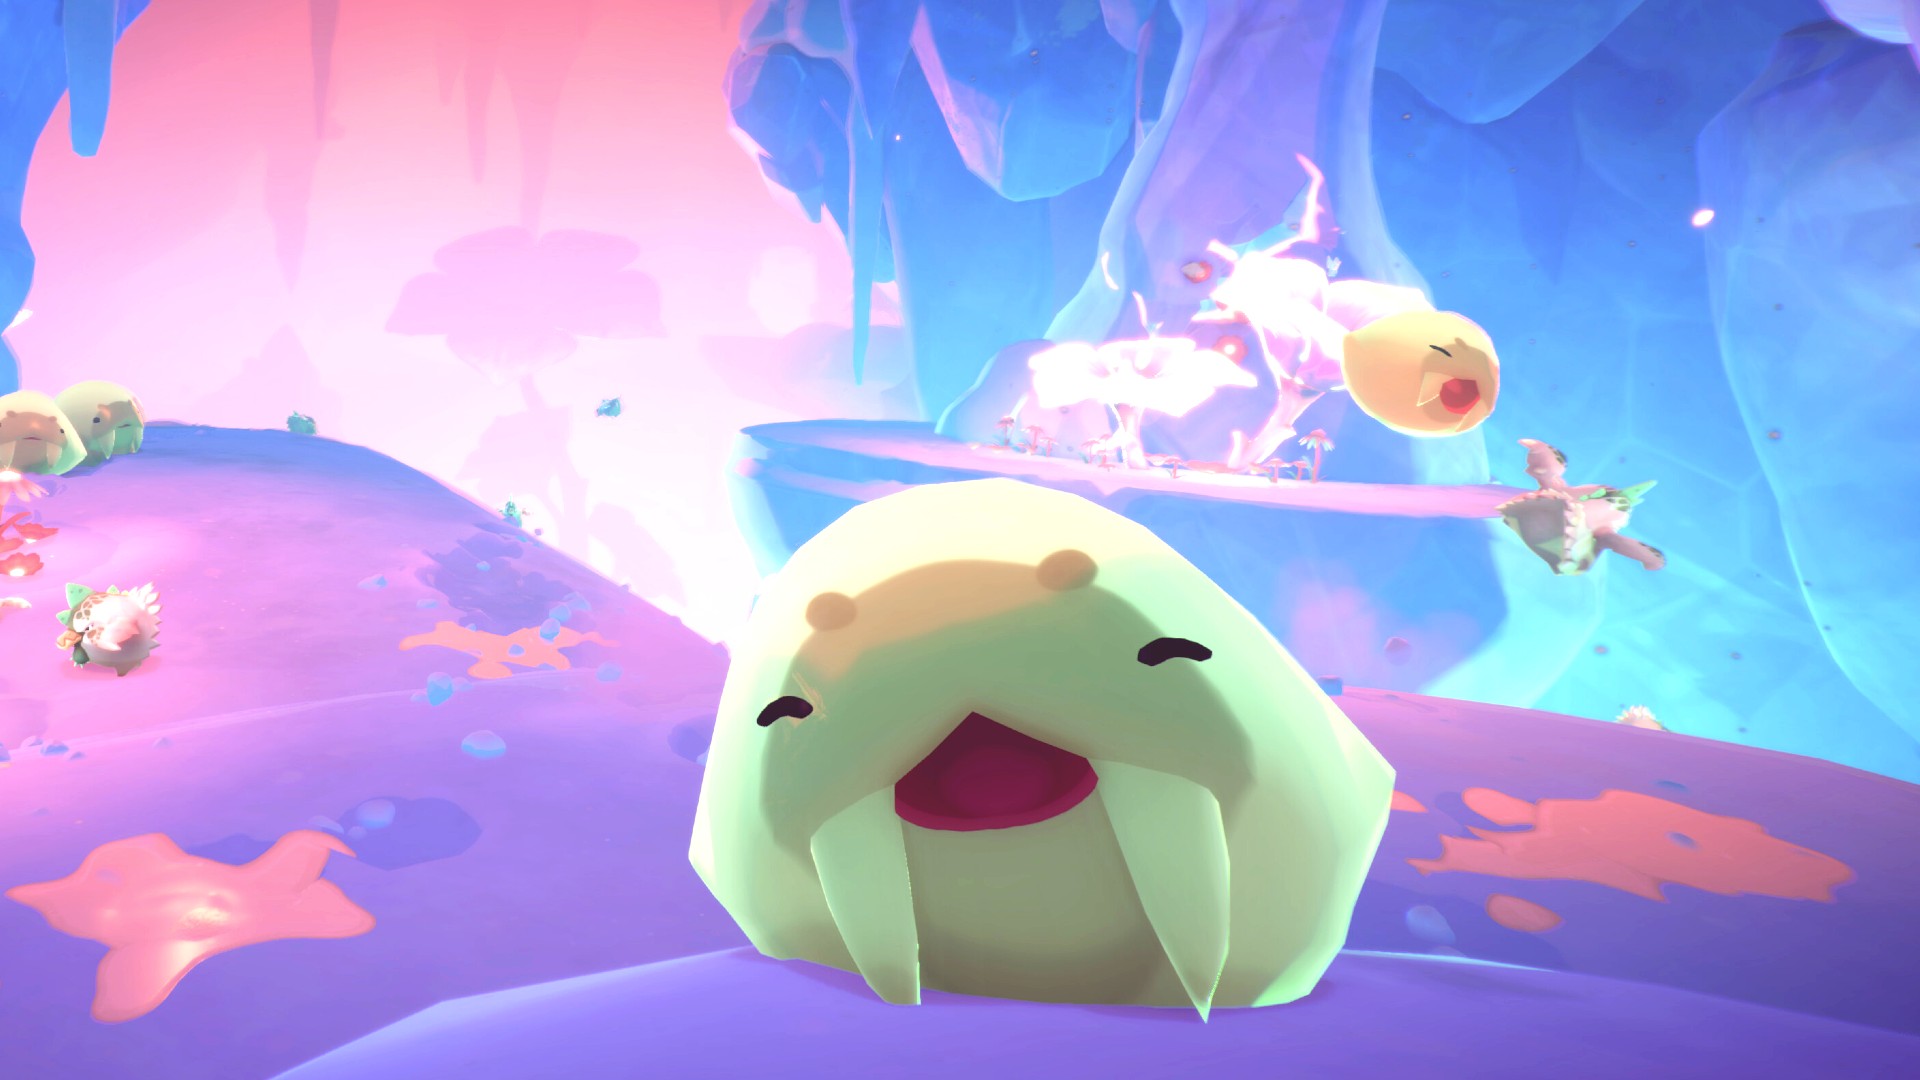 Slime Rancher 2 - Song of the Sabers - Patch 0.2.0 Notes - Slime